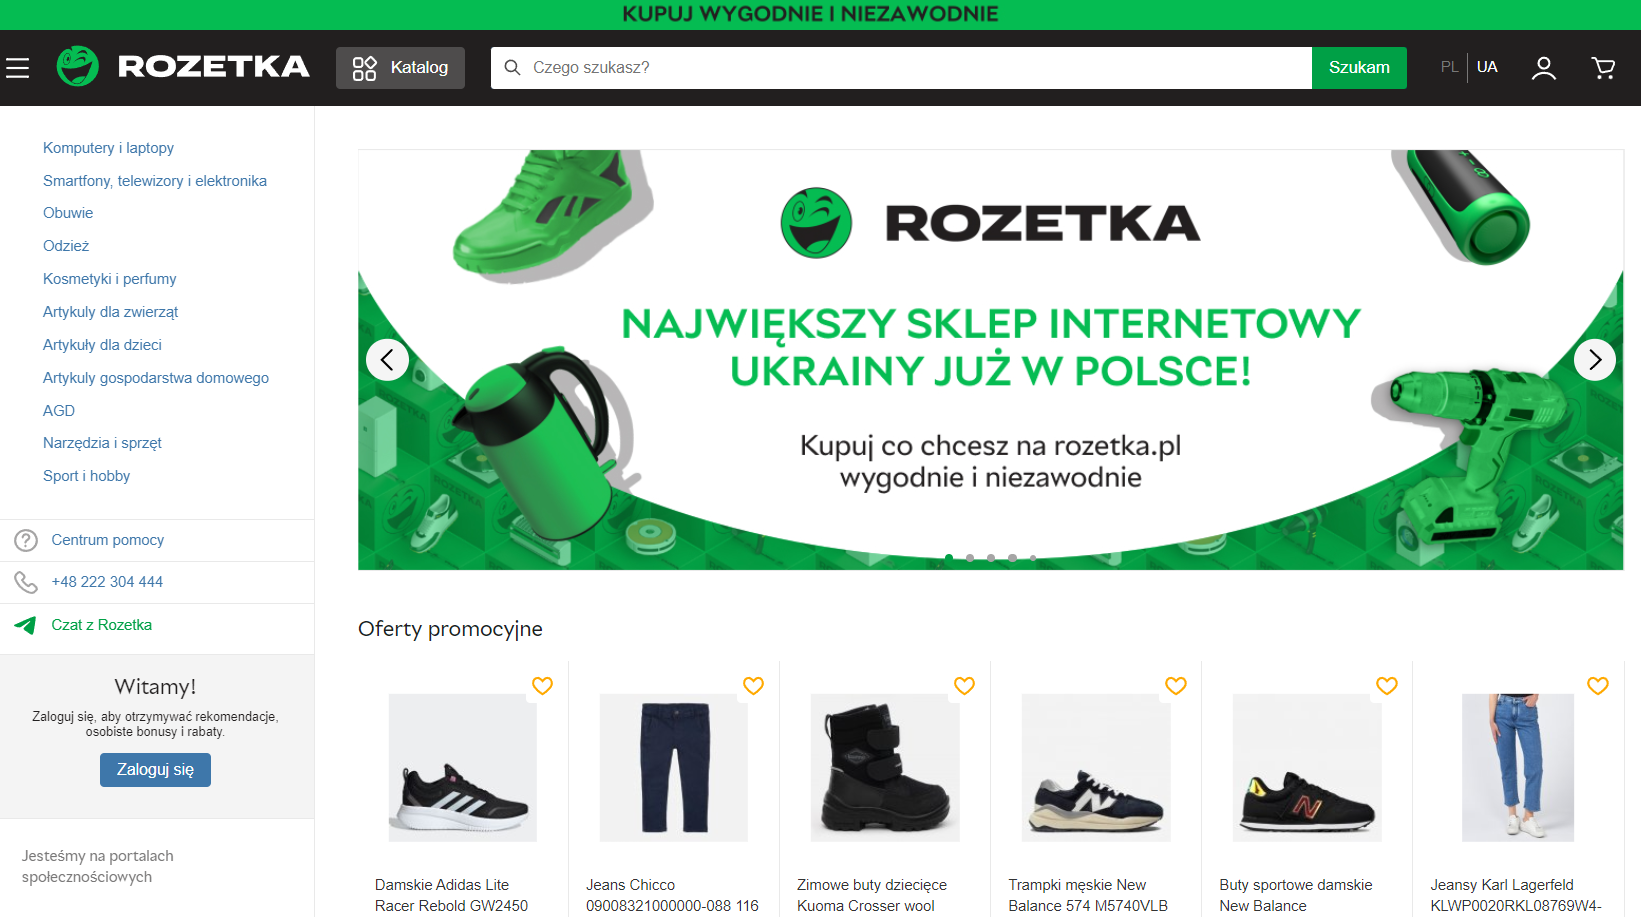 Rozetka has opened an online shop in Poland and is looking for new employees